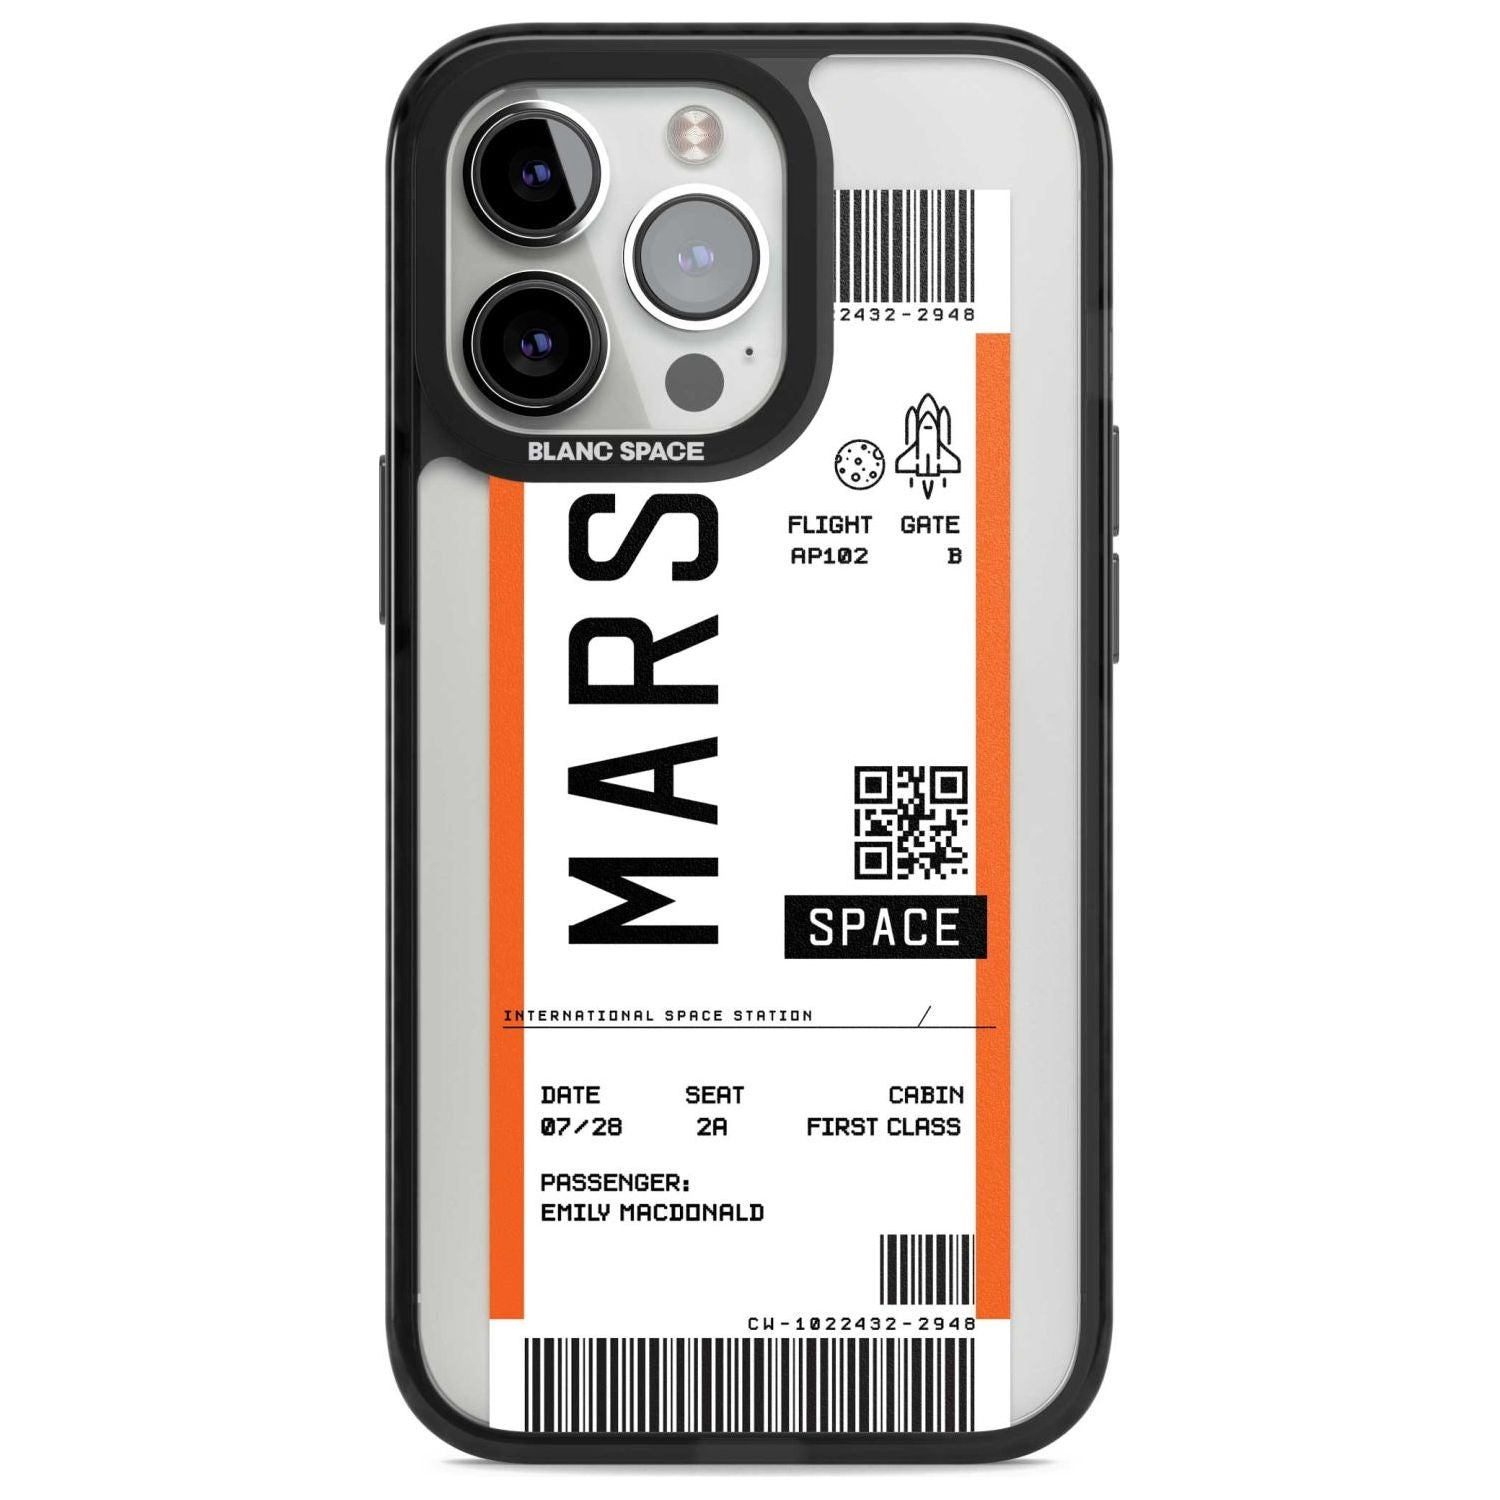 Personalised Mars Space Travel Ticket Custom Phone Case iPhone 15 Pro Max / Magsafe Black Impact Case,iPhone 15 Pro / Magsafe Black Impact Case,iPhone 14 Pro Max / Magsafe Black Impact Case,iPhone 14 Pro / Magsafe Black Impact Case,iPhone 13 Pro / Magsafe Black Impact Case Blanc Space